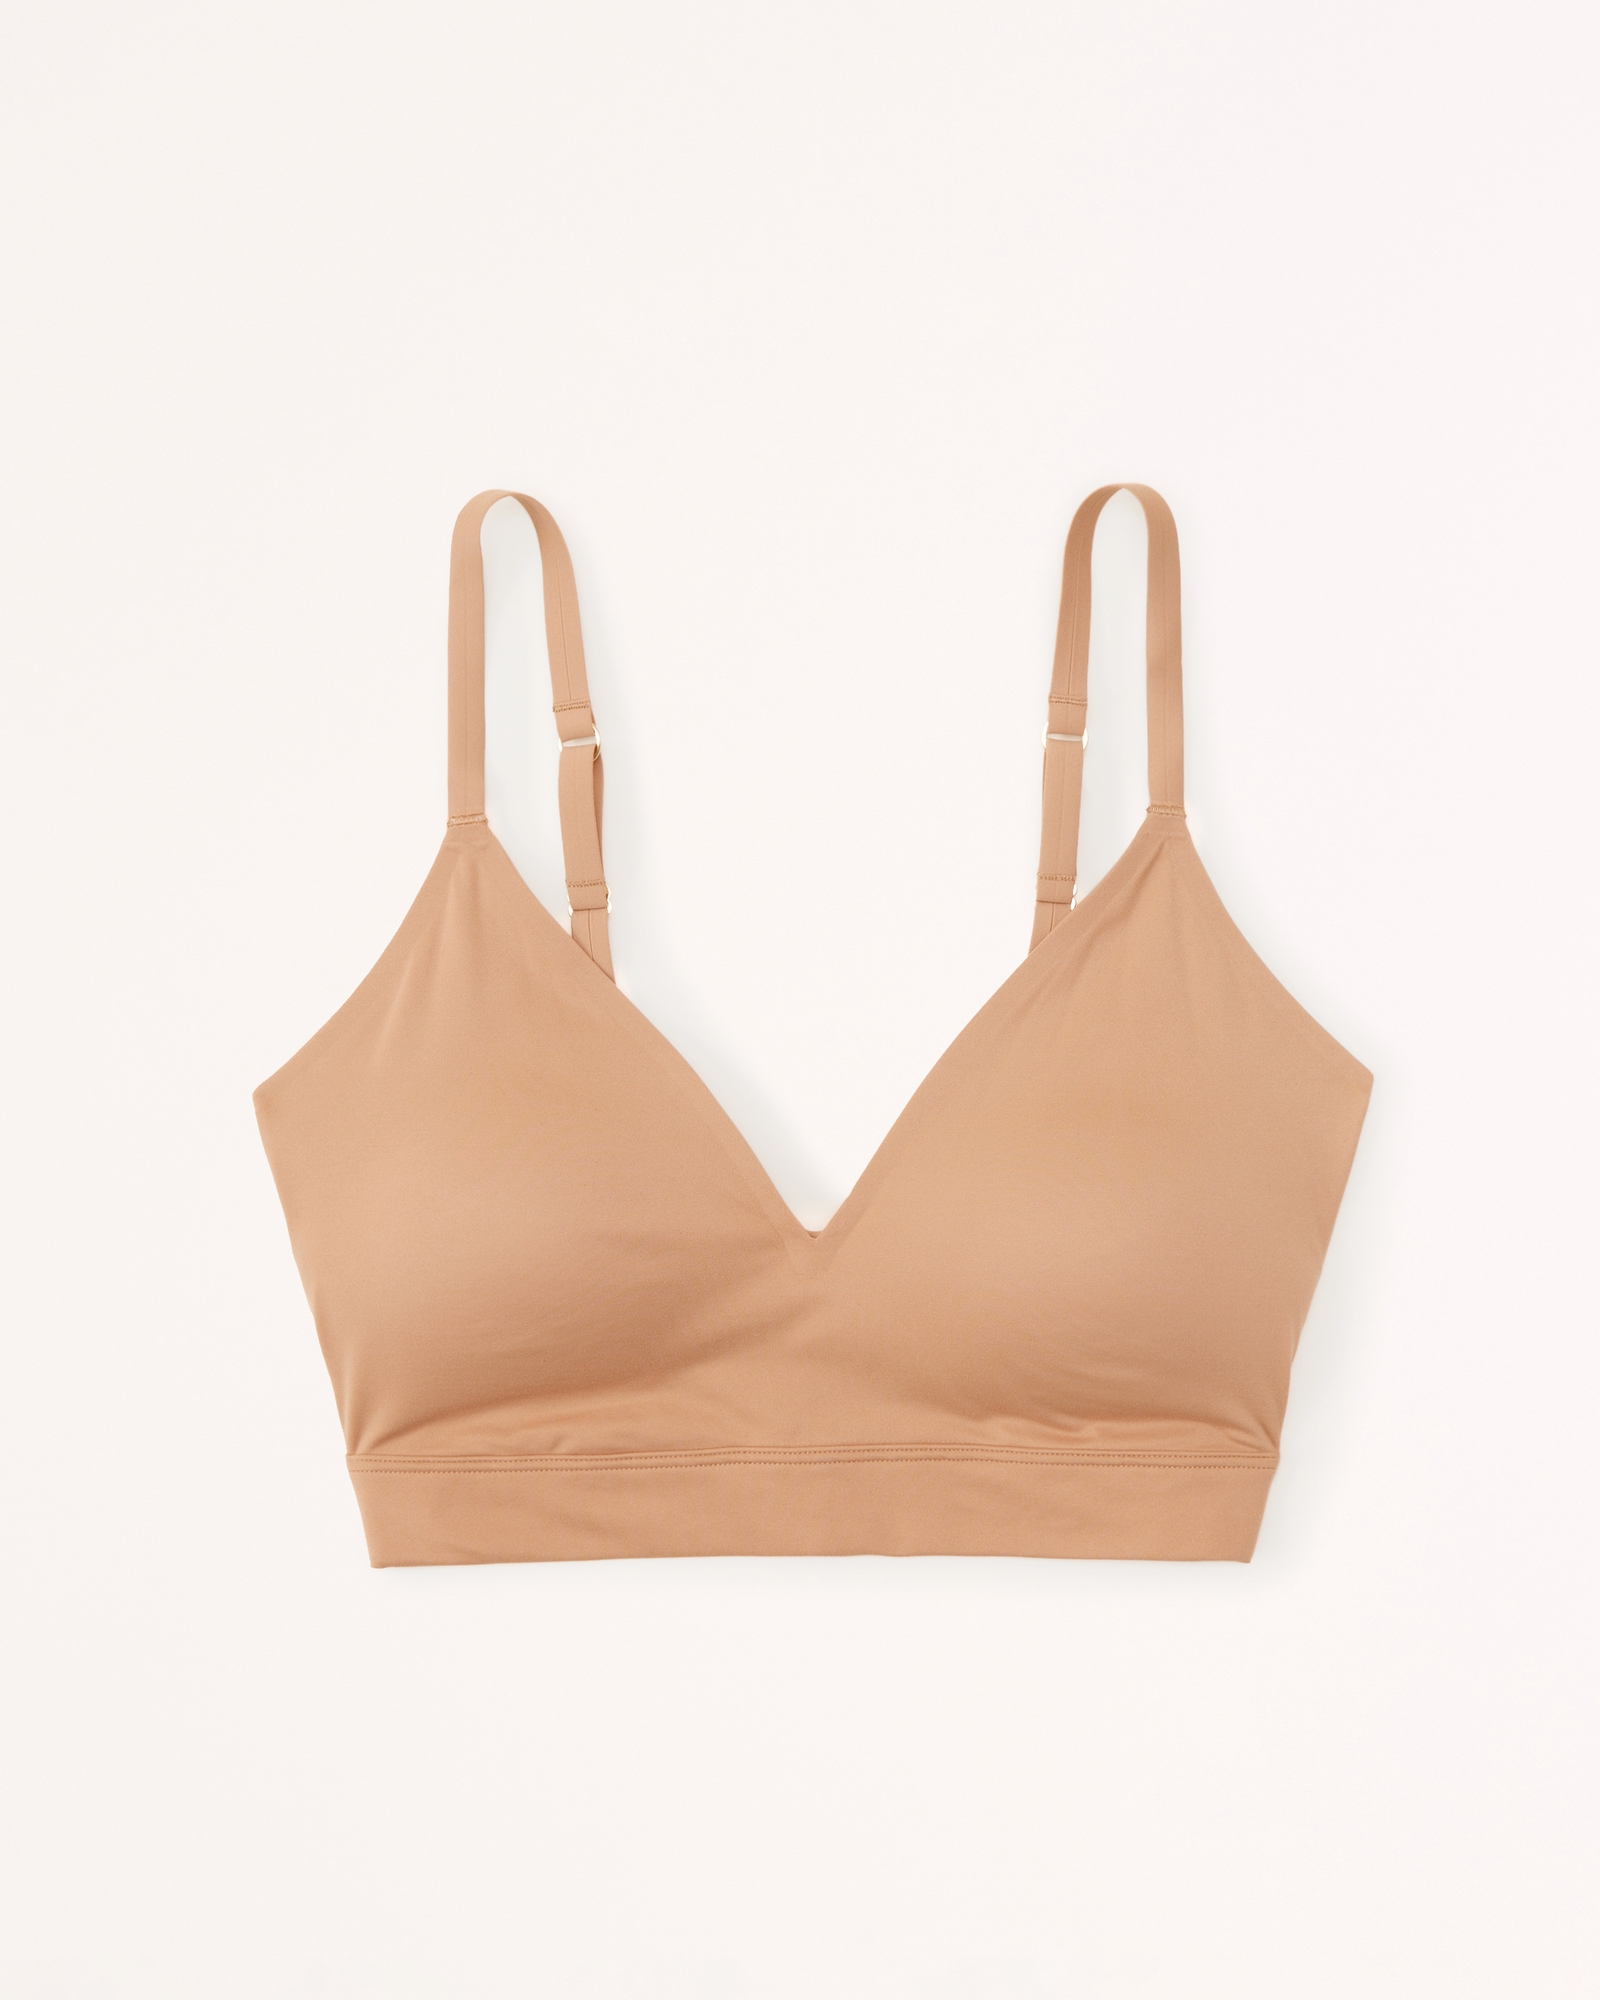 Buy Bodycare B, C & D Cup Perfect Coverage Bra-Pack Of 2 - Nude online